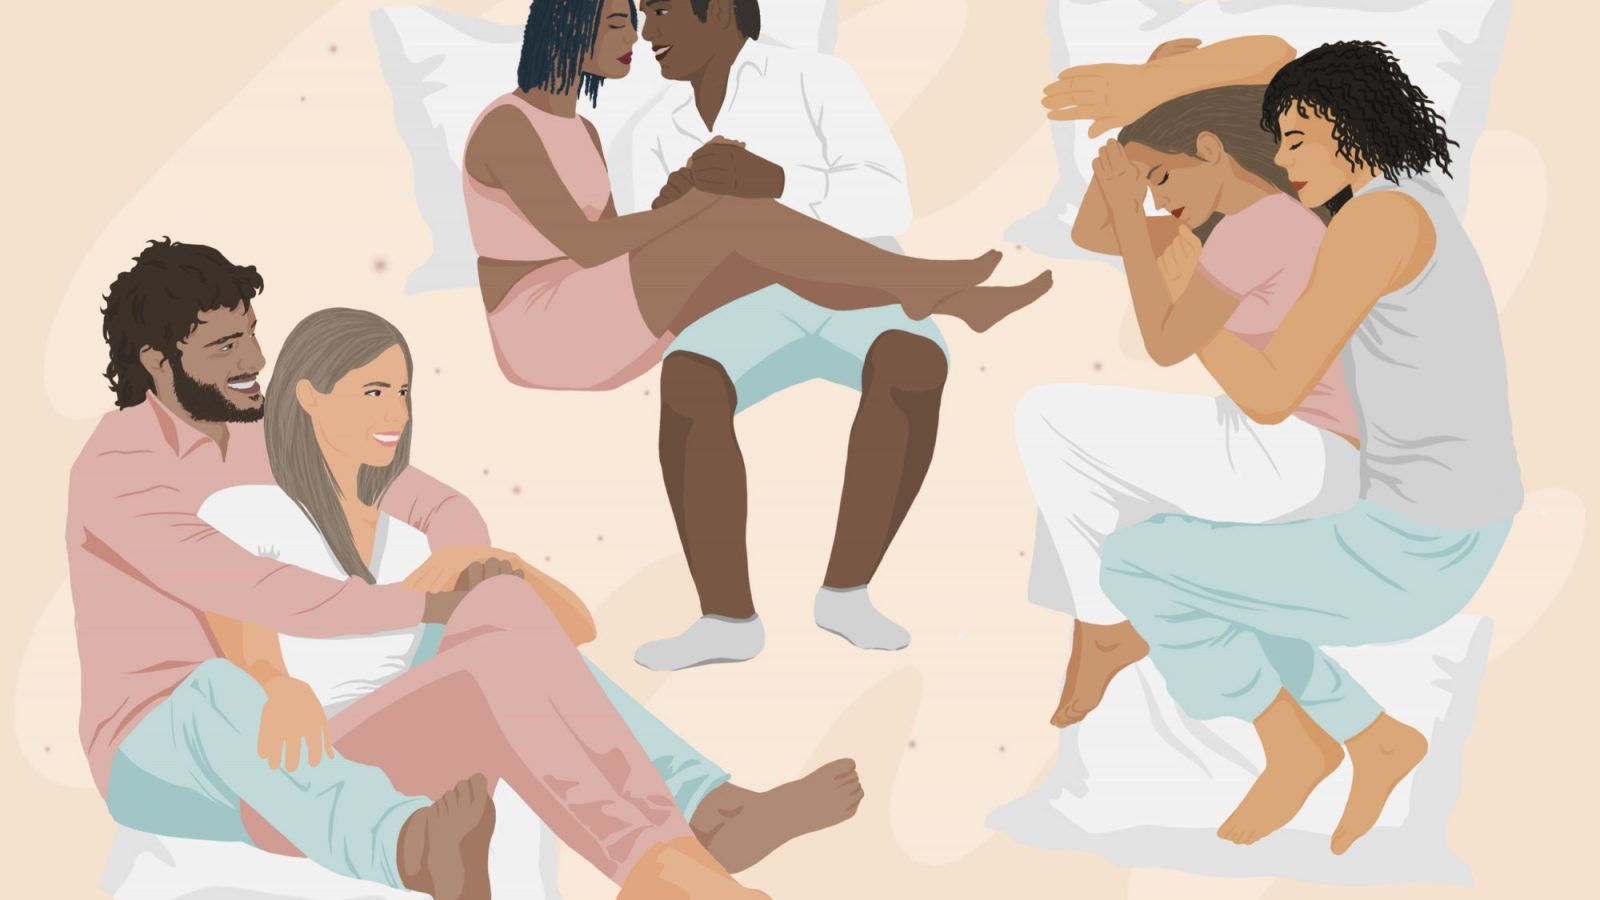 The Best Cuddling Positions According To Cuddle Therapistshellogiggles